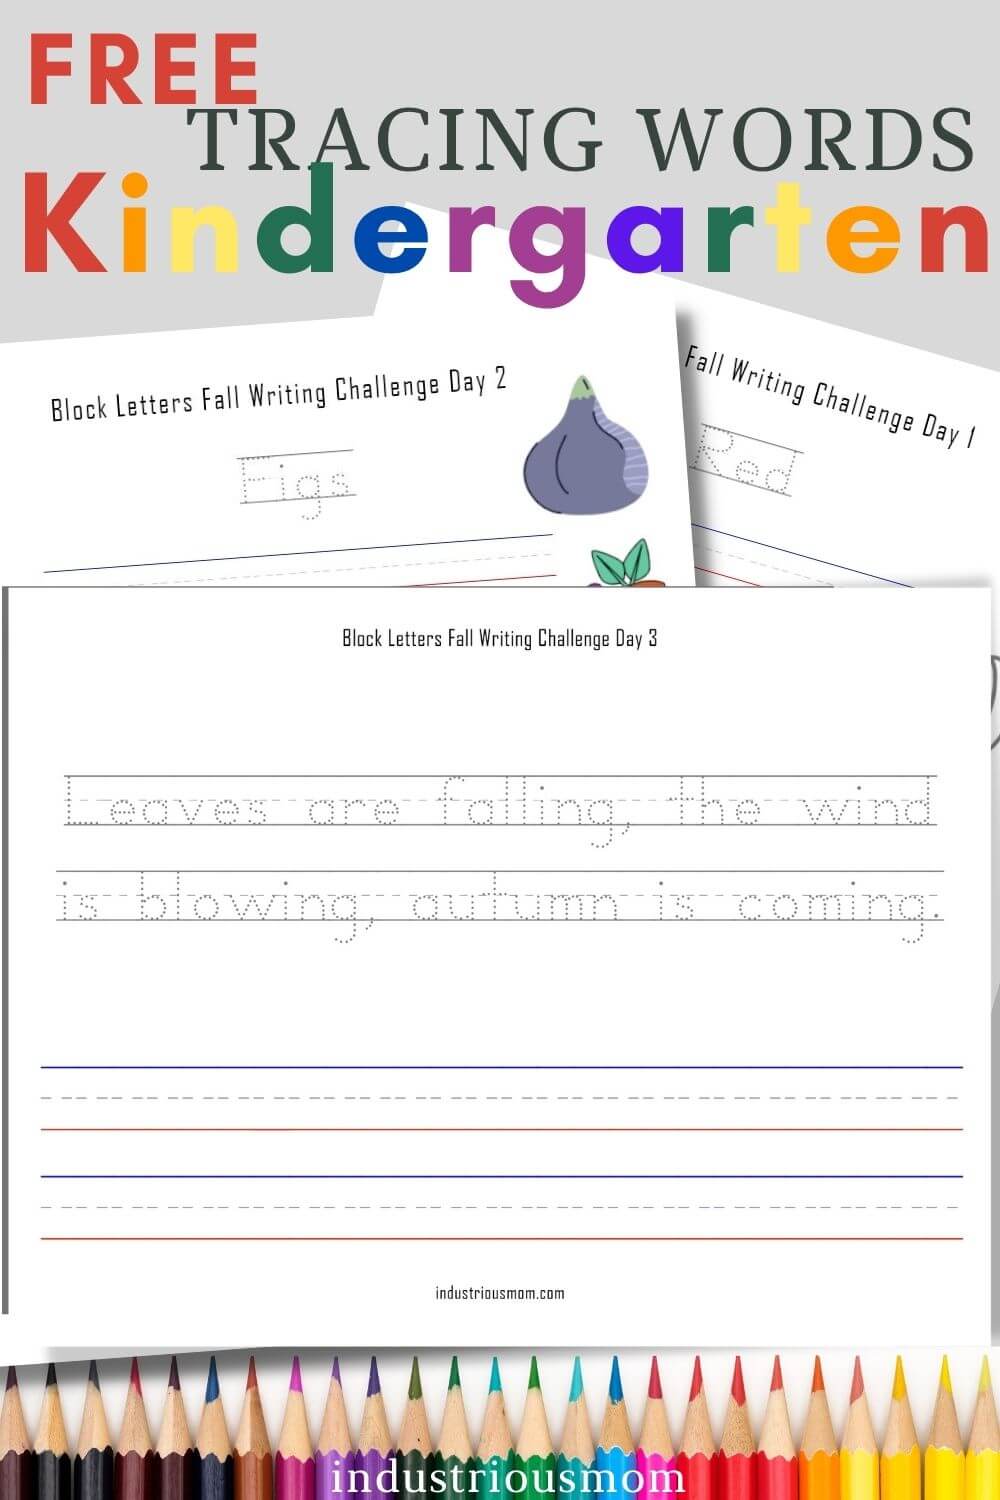 free-autumn-tracing-worksheets-words-and-sentences-to-trace